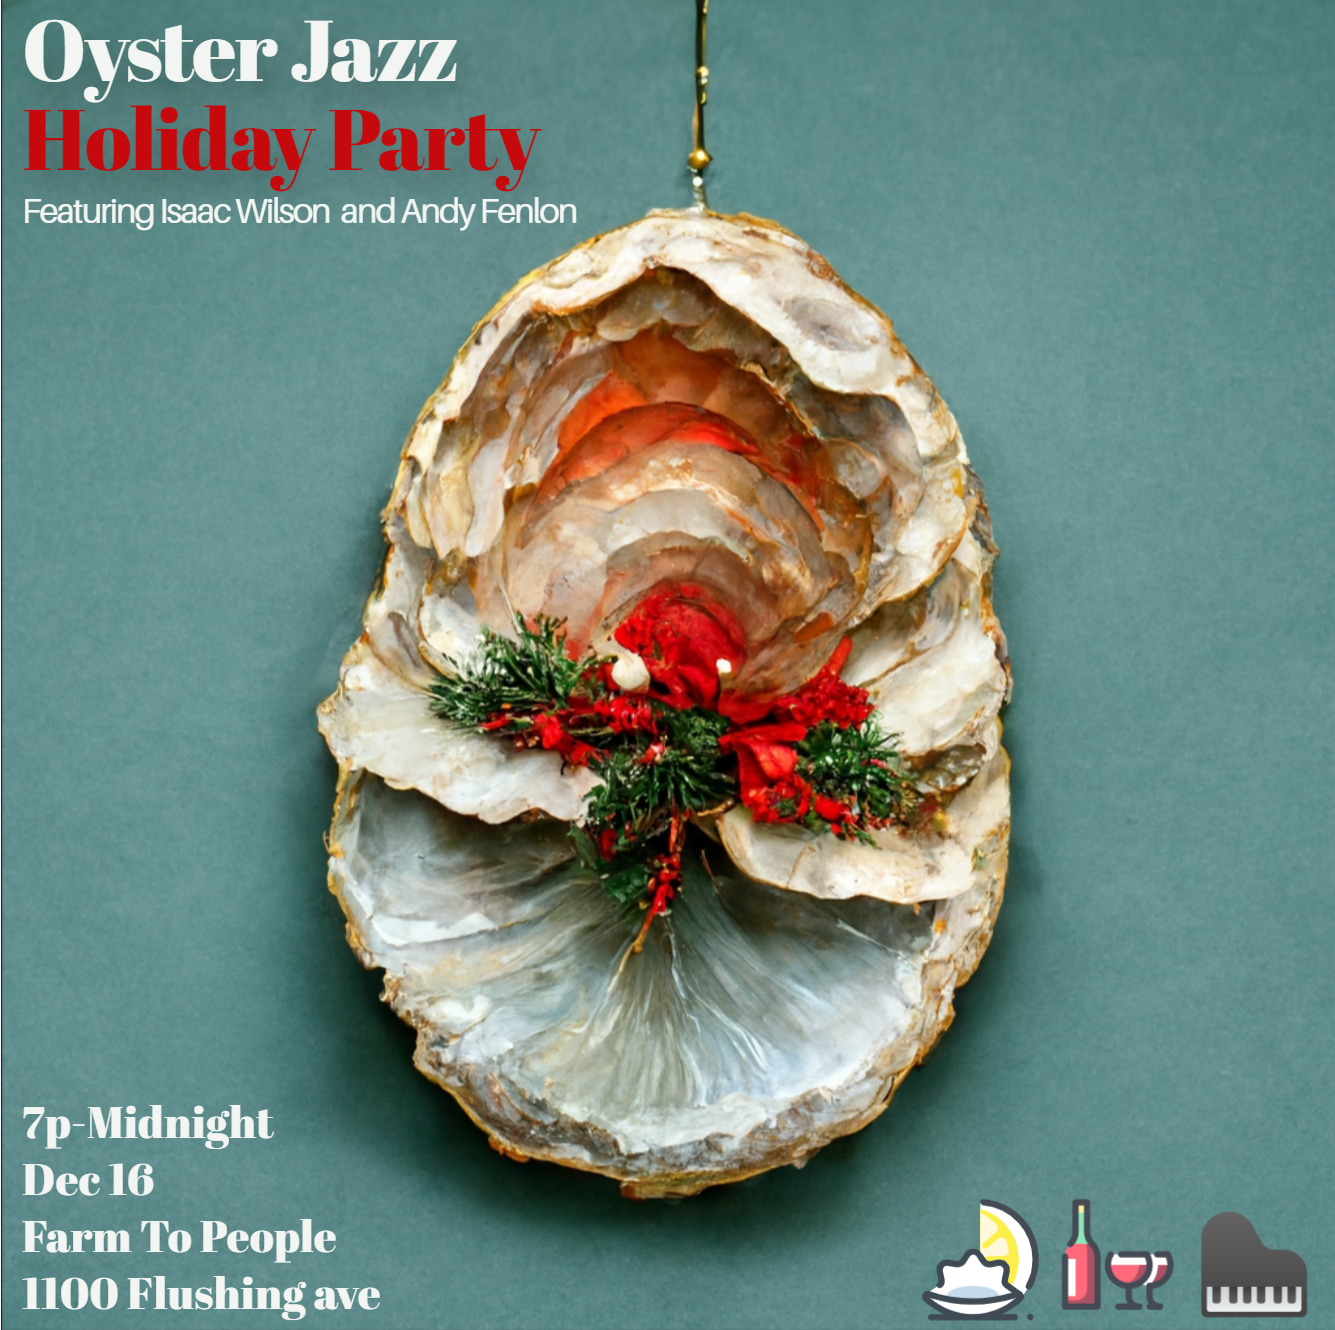 Oyster Jazz Holiday Party